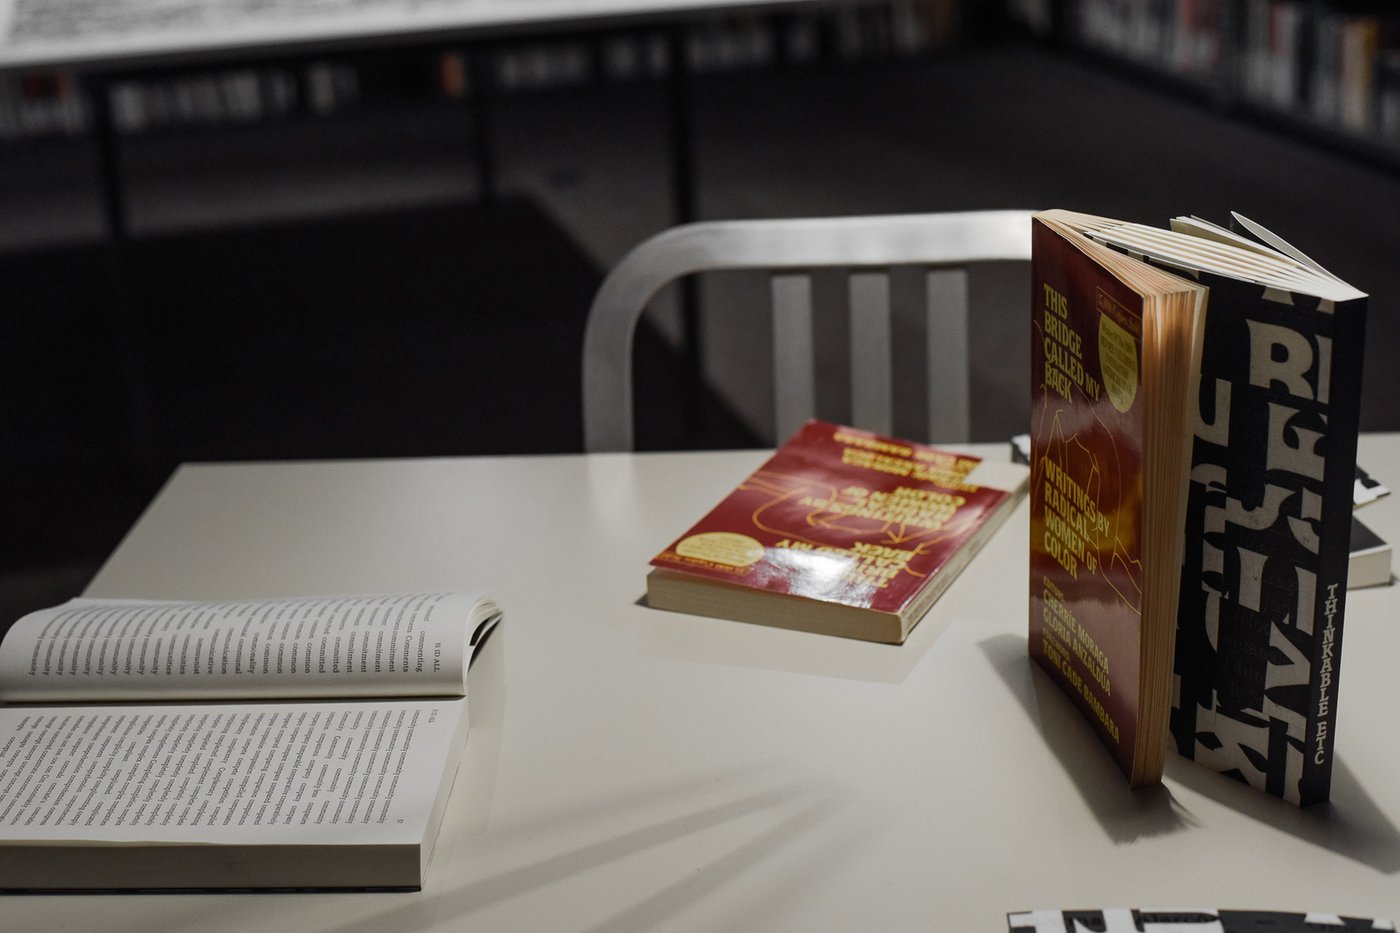 Several books presented on a table. Two books are intertwined on the open side.